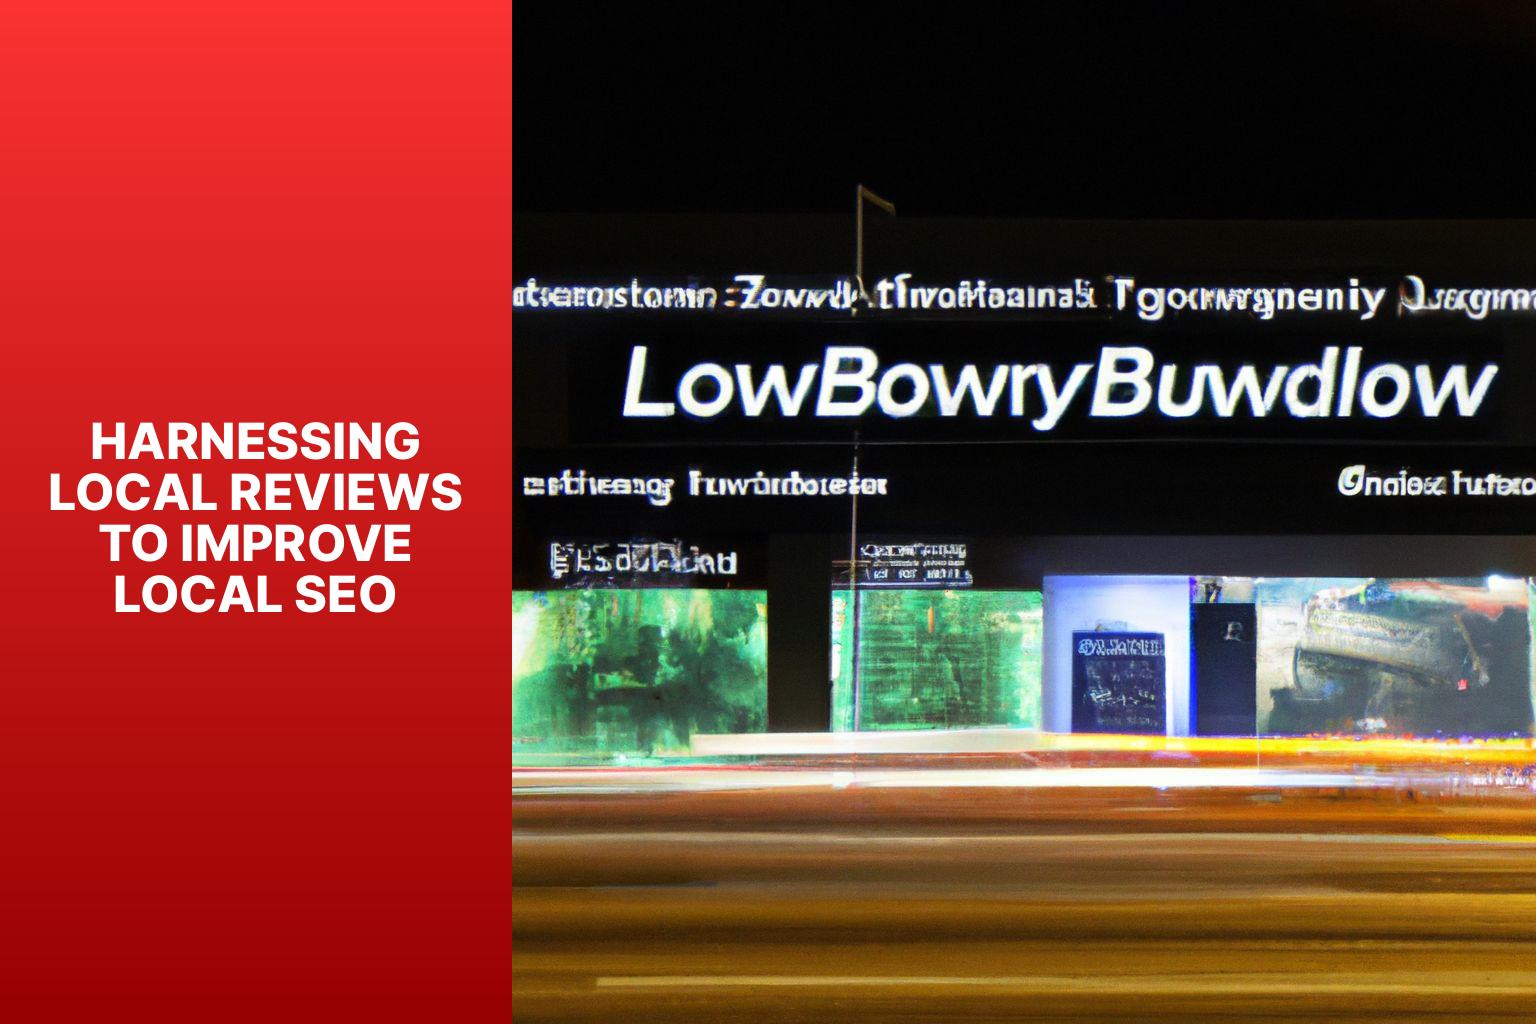 Harnessing Local Reviews to Improve Local SEO